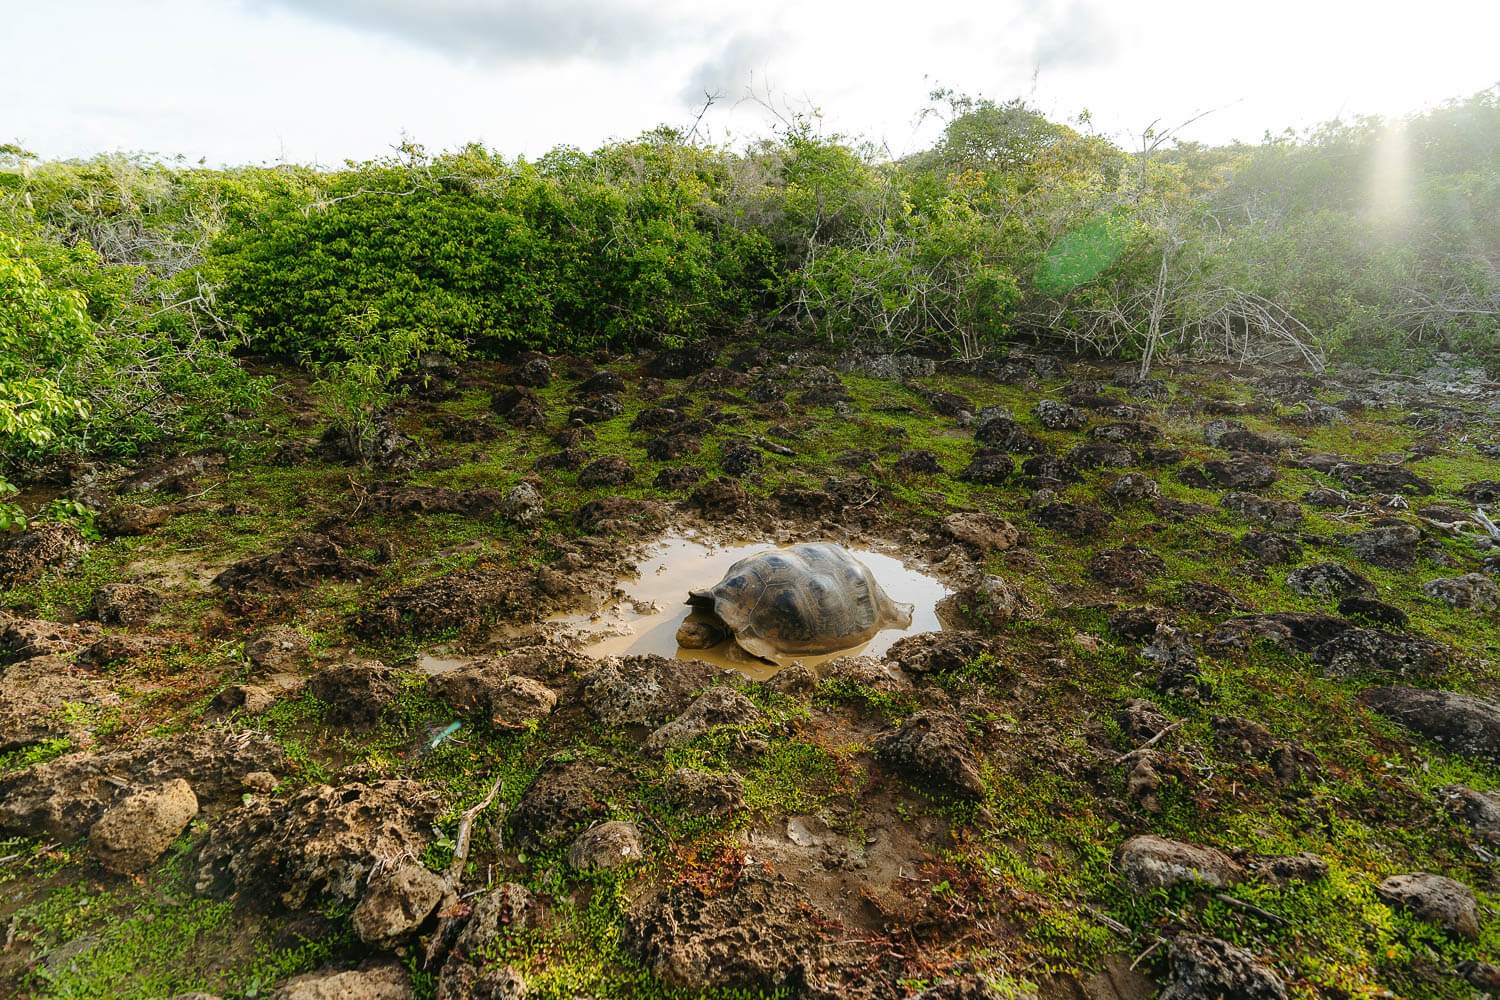 A giant tortoise in "La Galapaguera" part of the Highlands Tour in San Cristobal, Galápagos